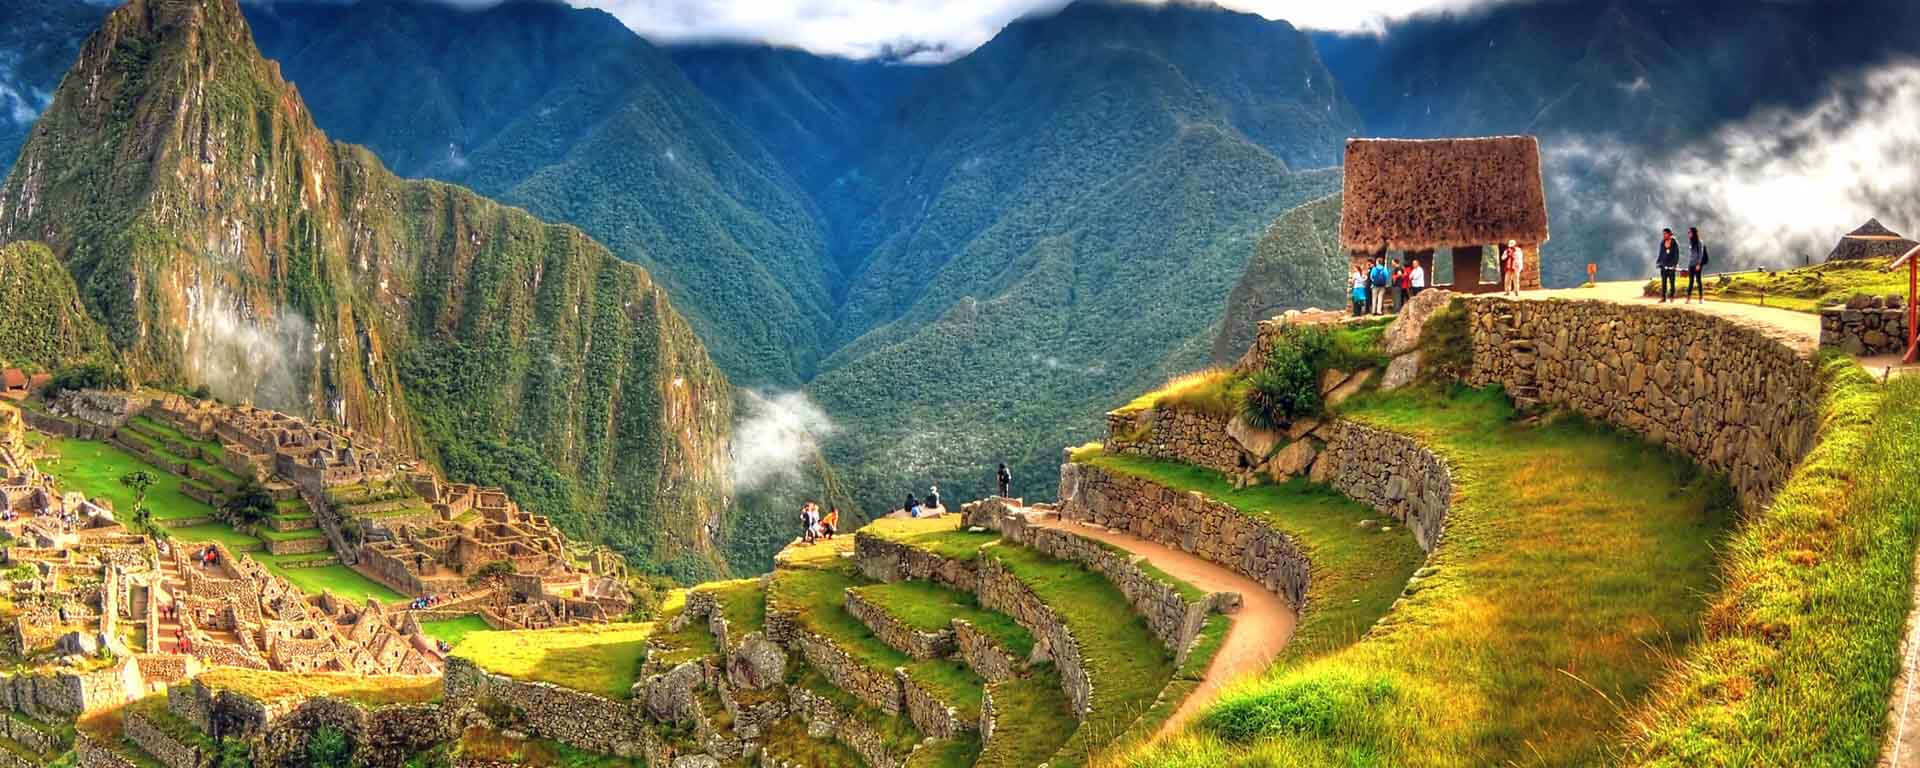 Peru Tour Packages